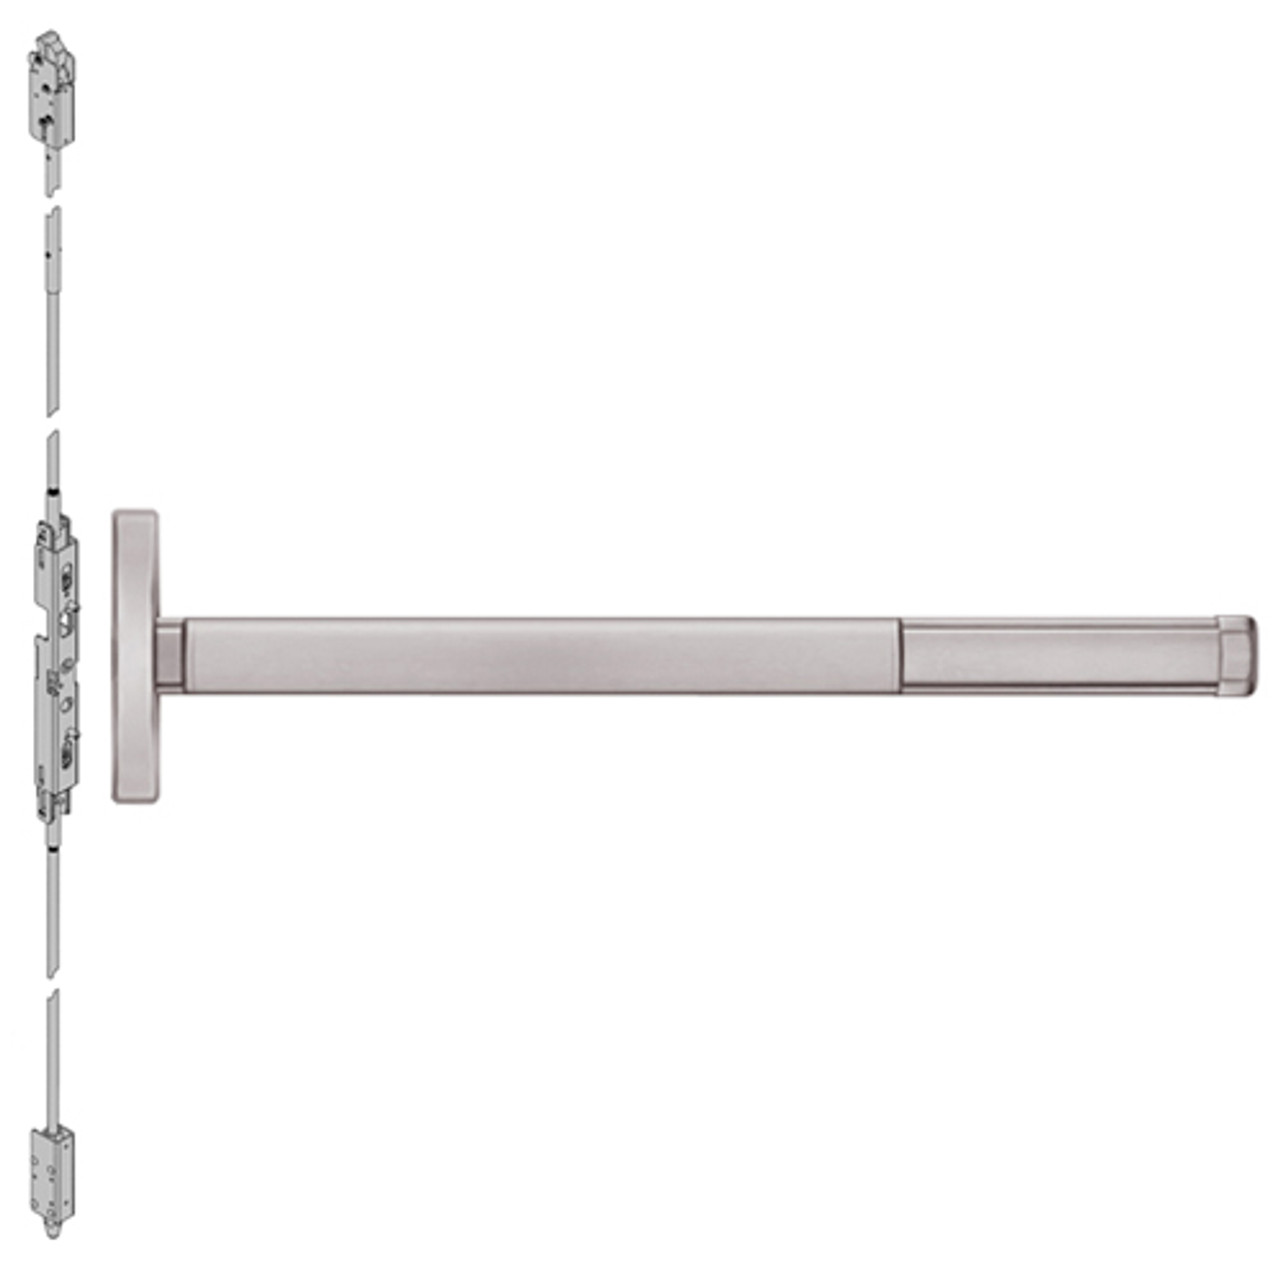 FL2608LBR-628-36 PHI 2600 Series Fire Rated Concealed Vertical Rod Exit Device Prepped for Key Controls Lever with Less Bottom Rod in Satin Aluminum Finish